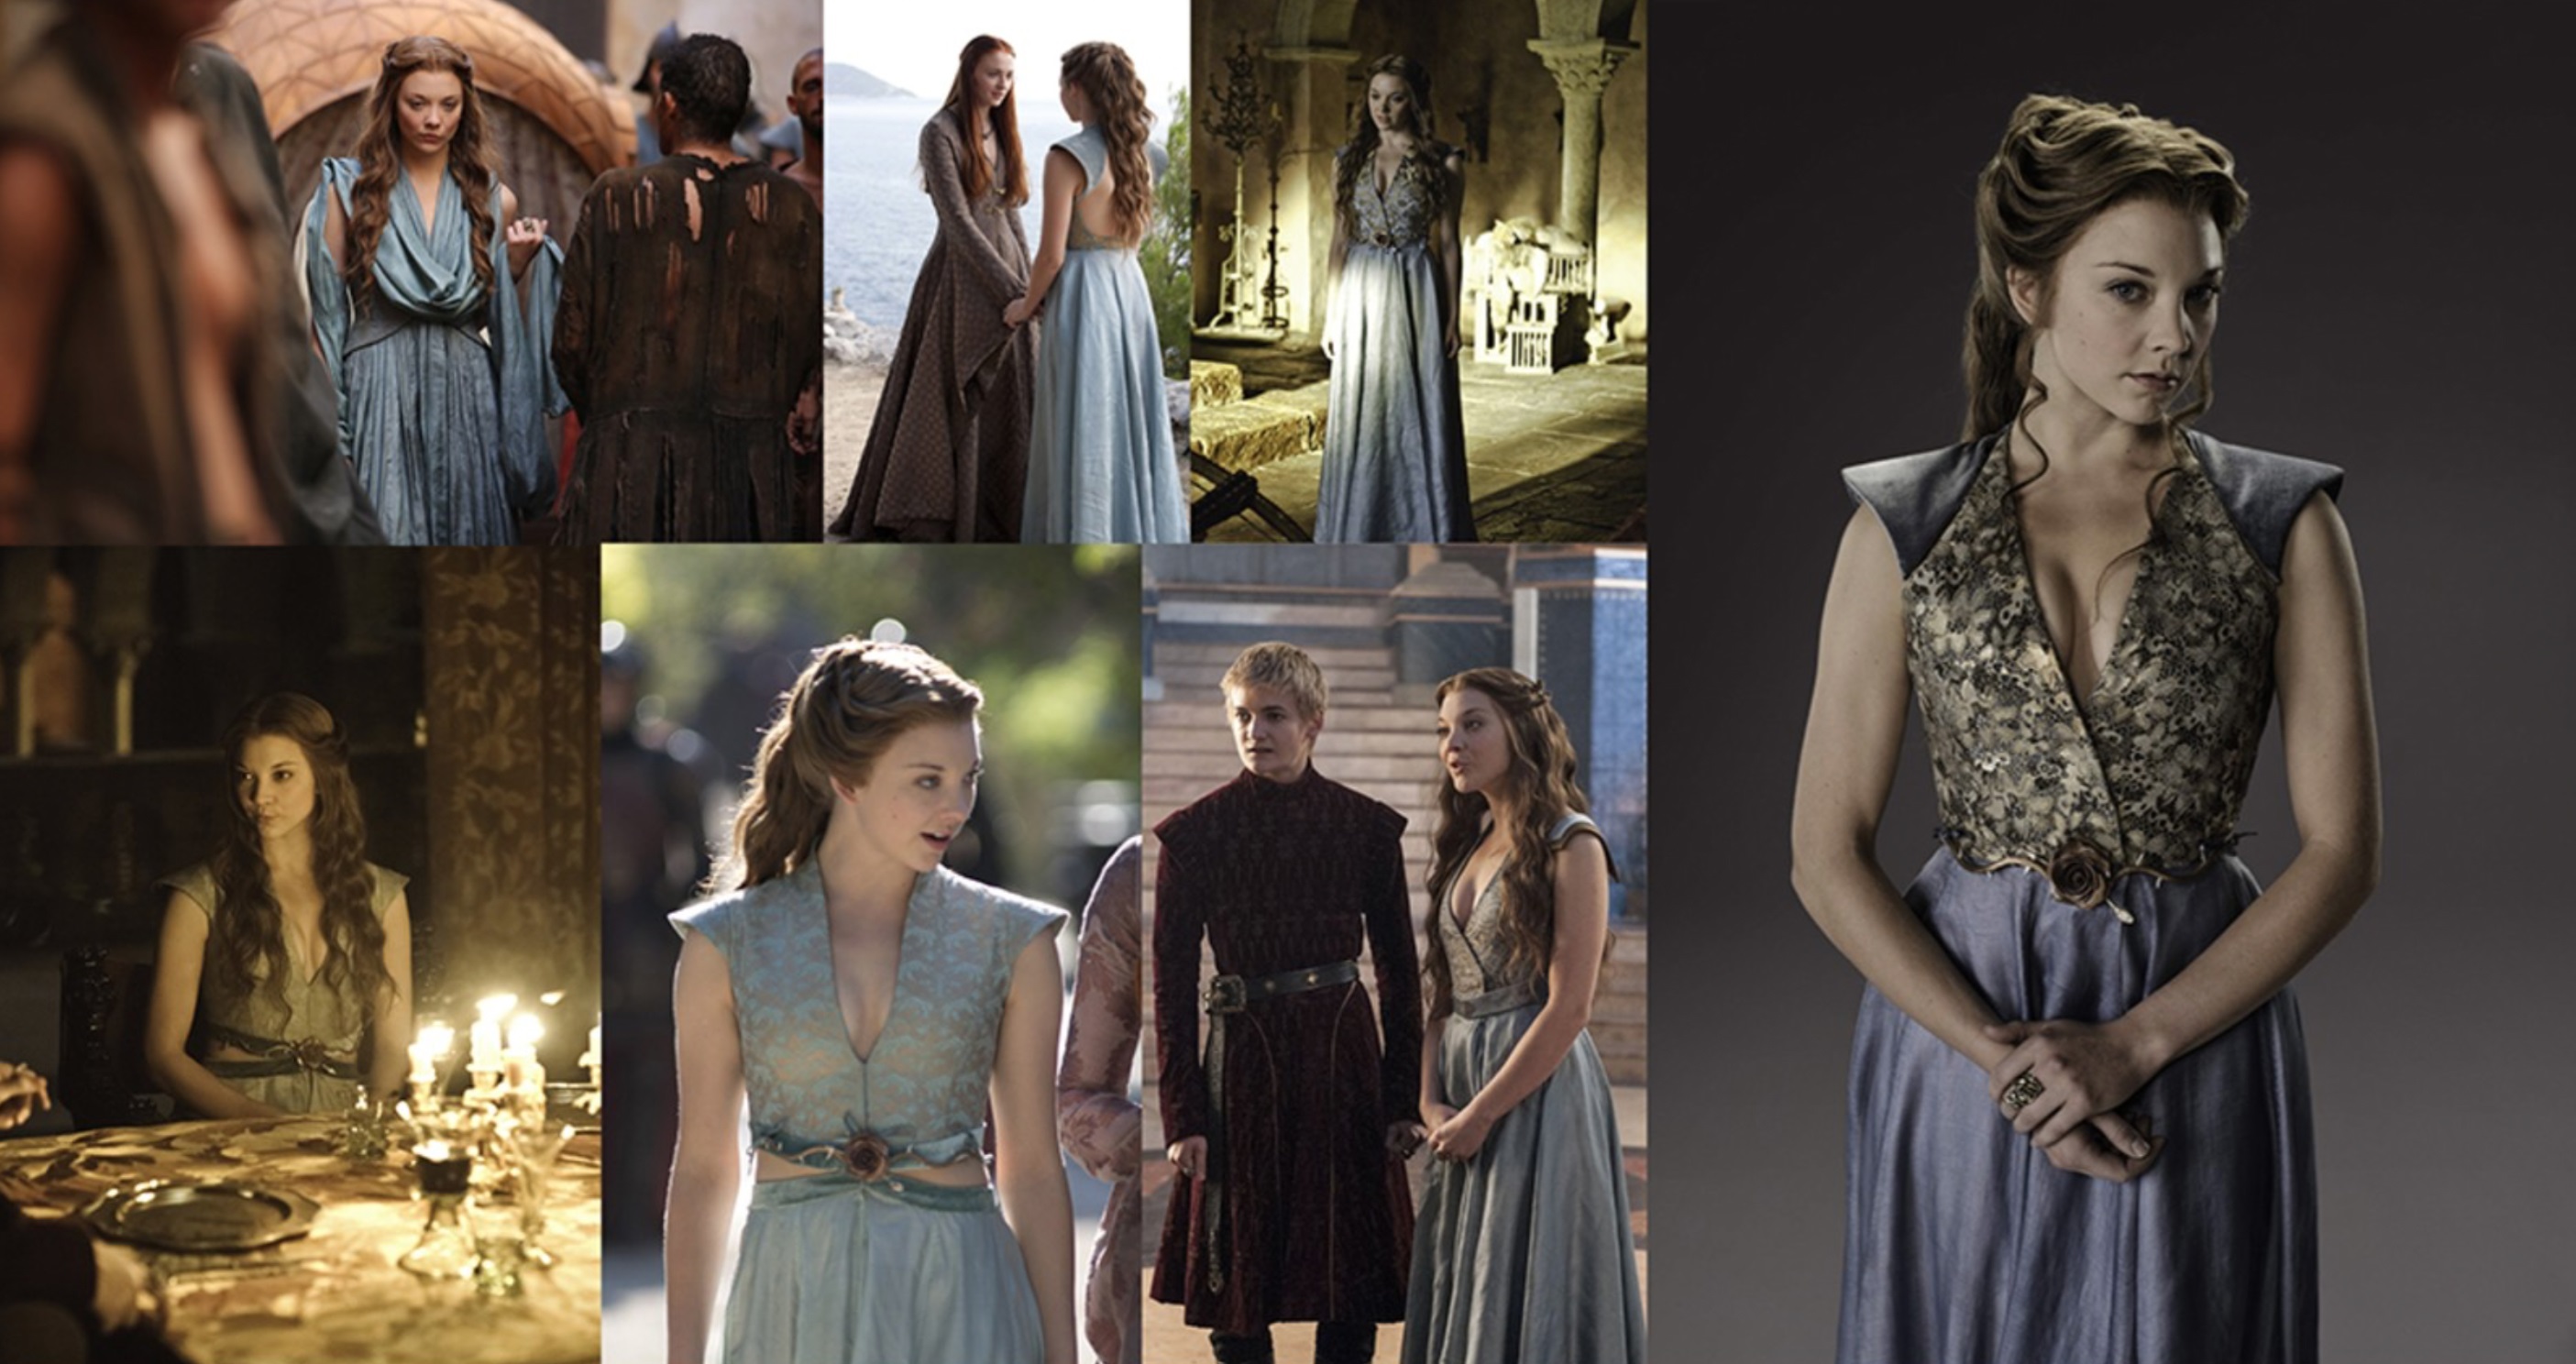 Game of Threads: A Lady's Armor - Margaery Tyrell | Watchers on the Wall |  A Game of Thrones Community 2014 - 2023